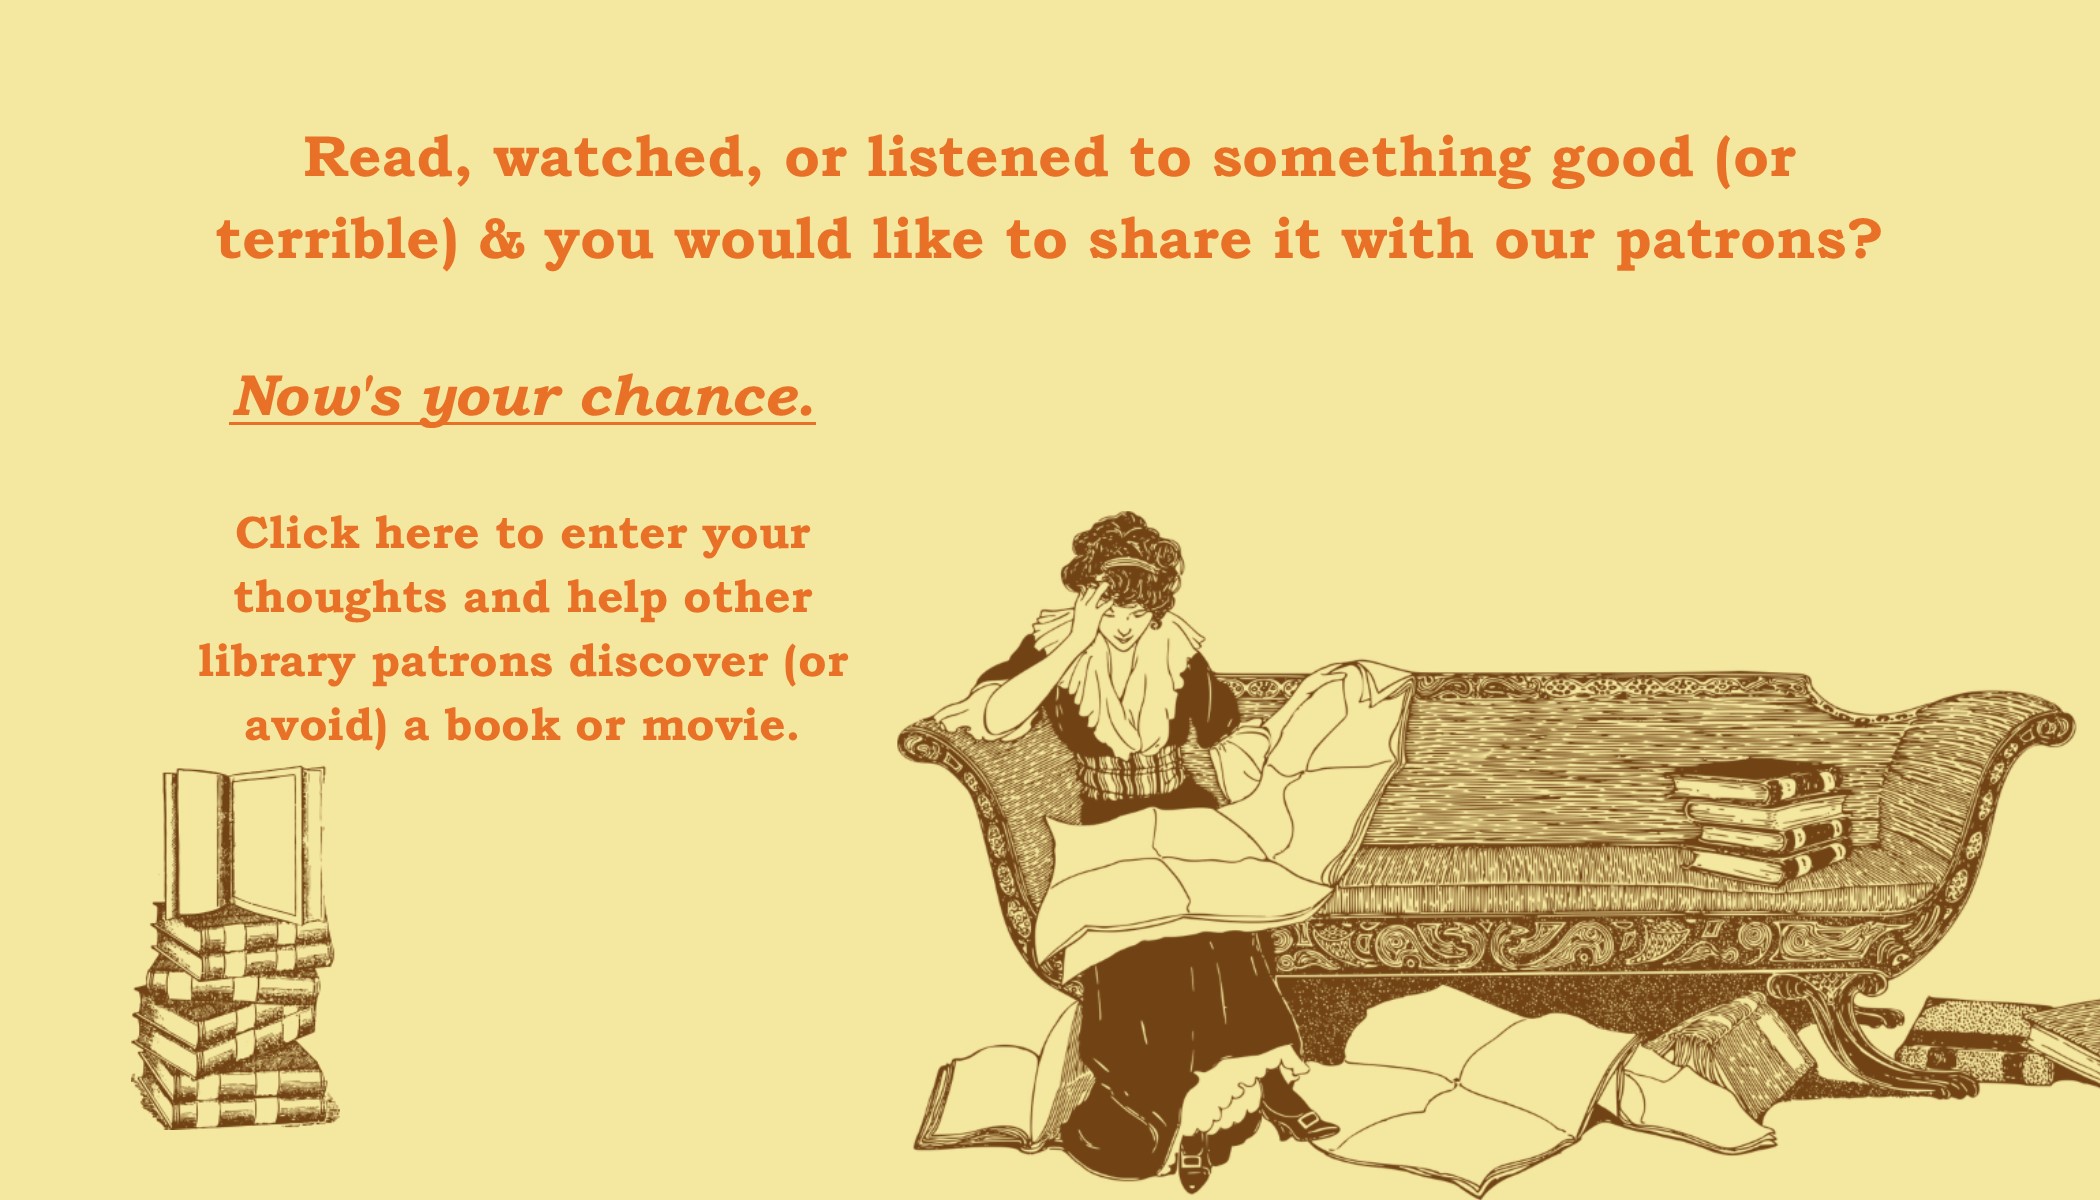 Read, watched, or listened to something good (or terrible) and you would like to share it with our patrons? Now's your chance. Click here to enter your thoughts and help other library patrons discover (or avoid) a book or movie.